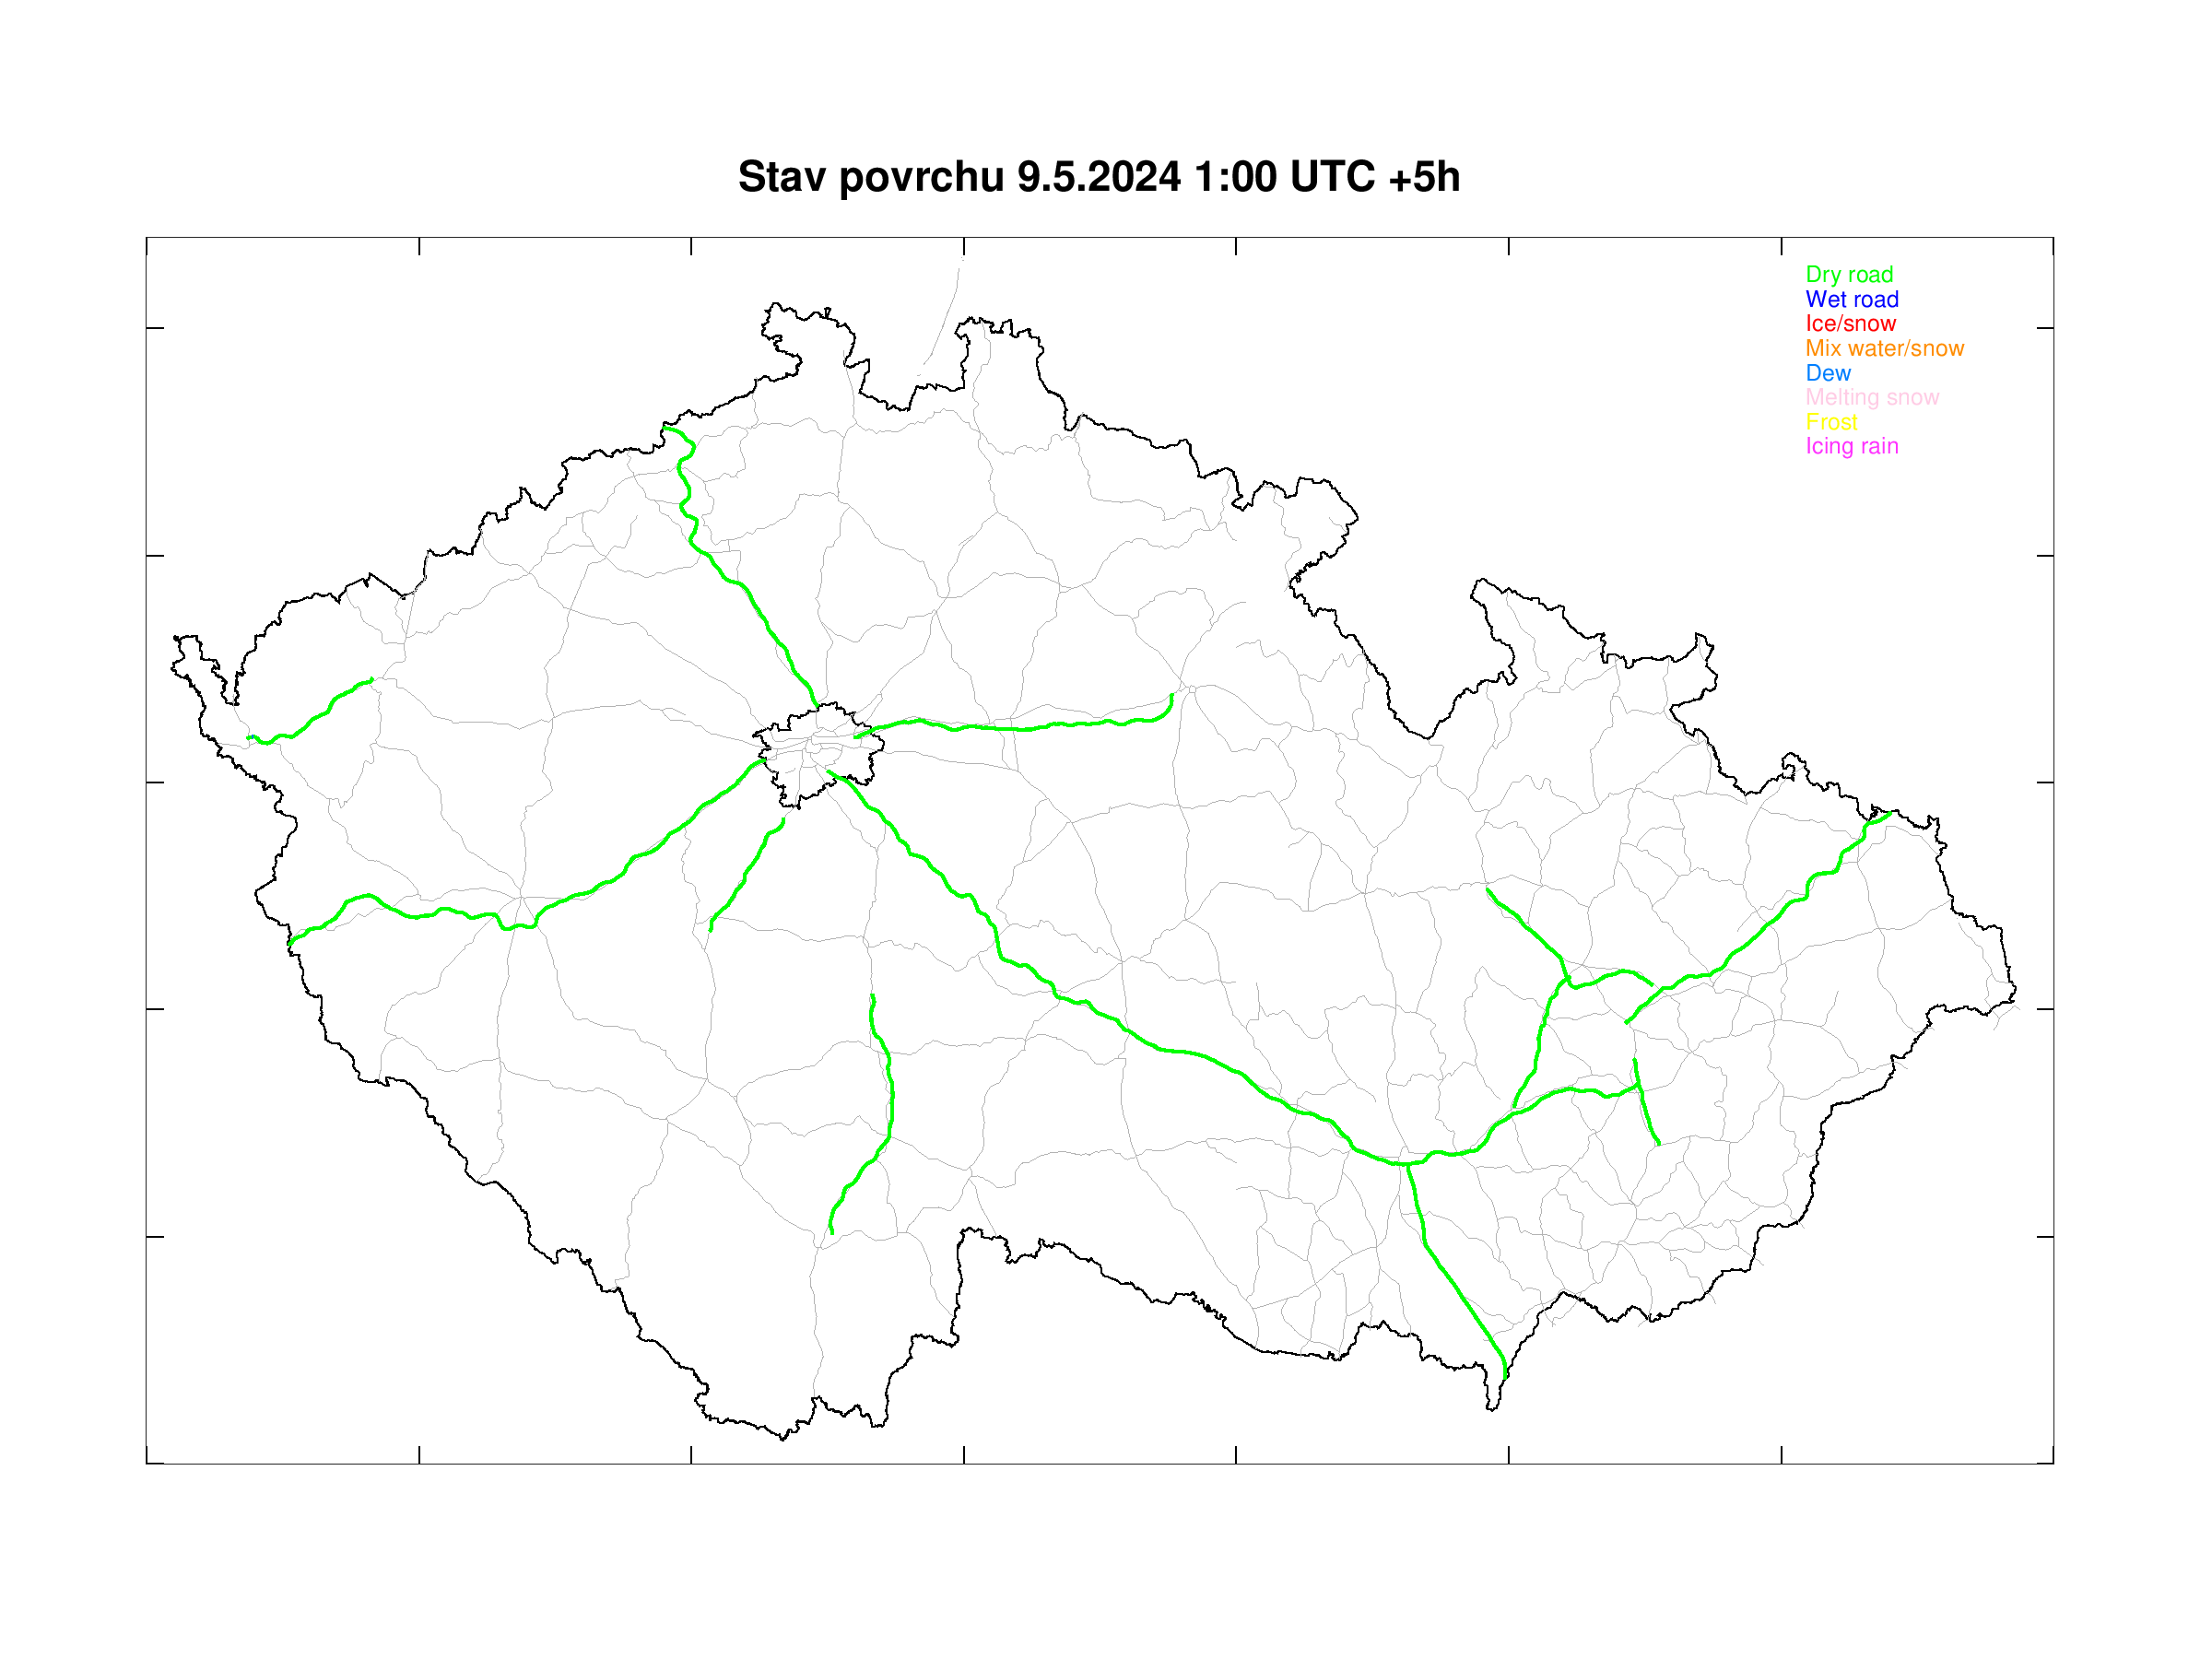 Road surface condition forecast for Czech highways +5h